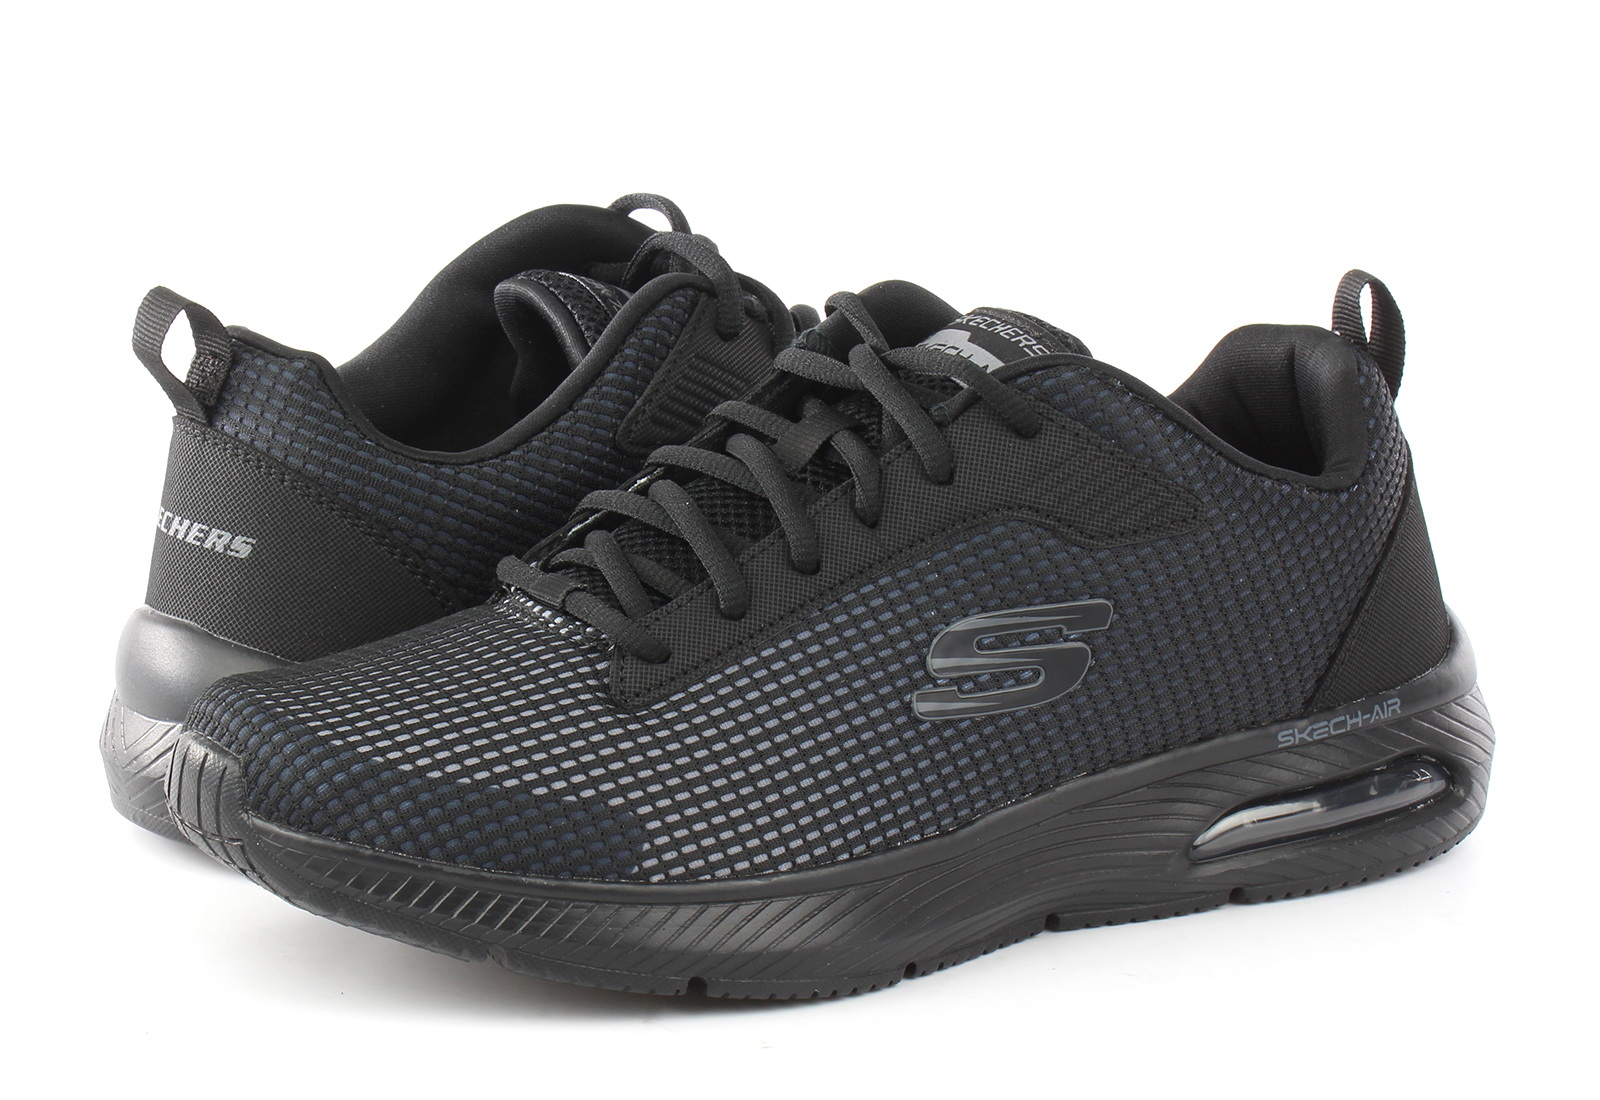 Baskets Homme Skechers Dyna-air-Blyce